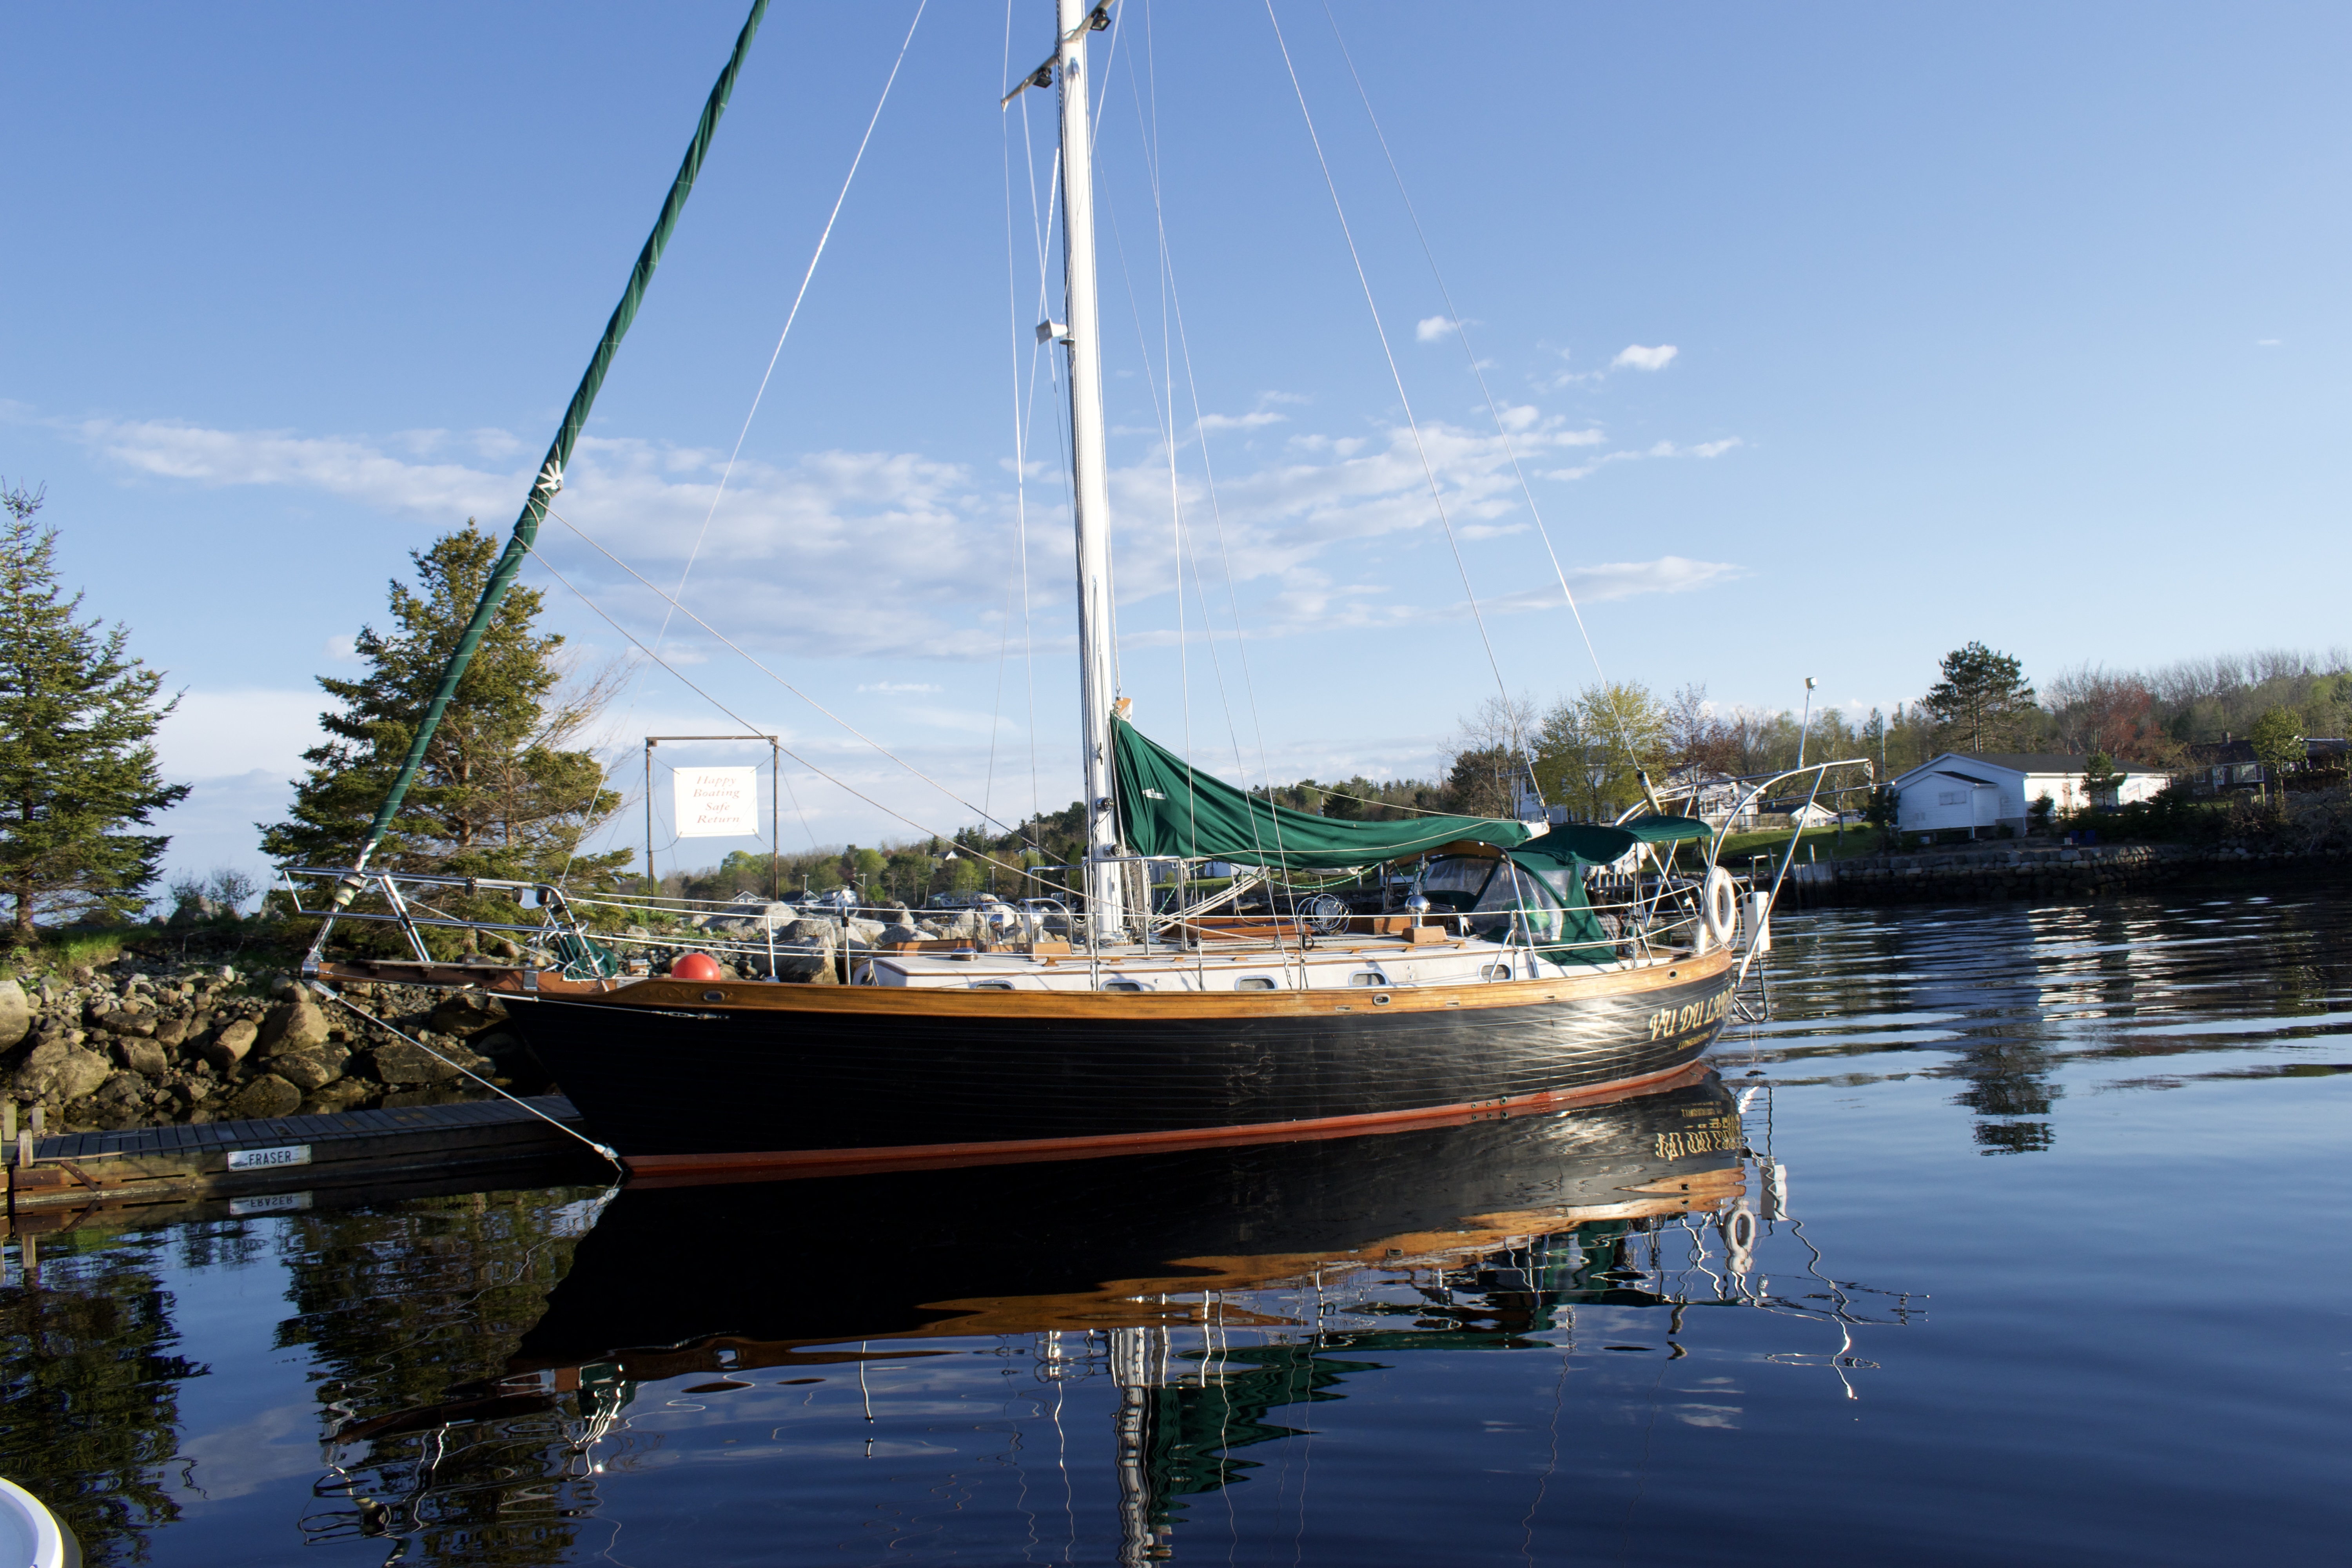 1984 Ta Shing Yachts Baba 40 Sailboat for sale in Hutchinson Is, FL - image 4 